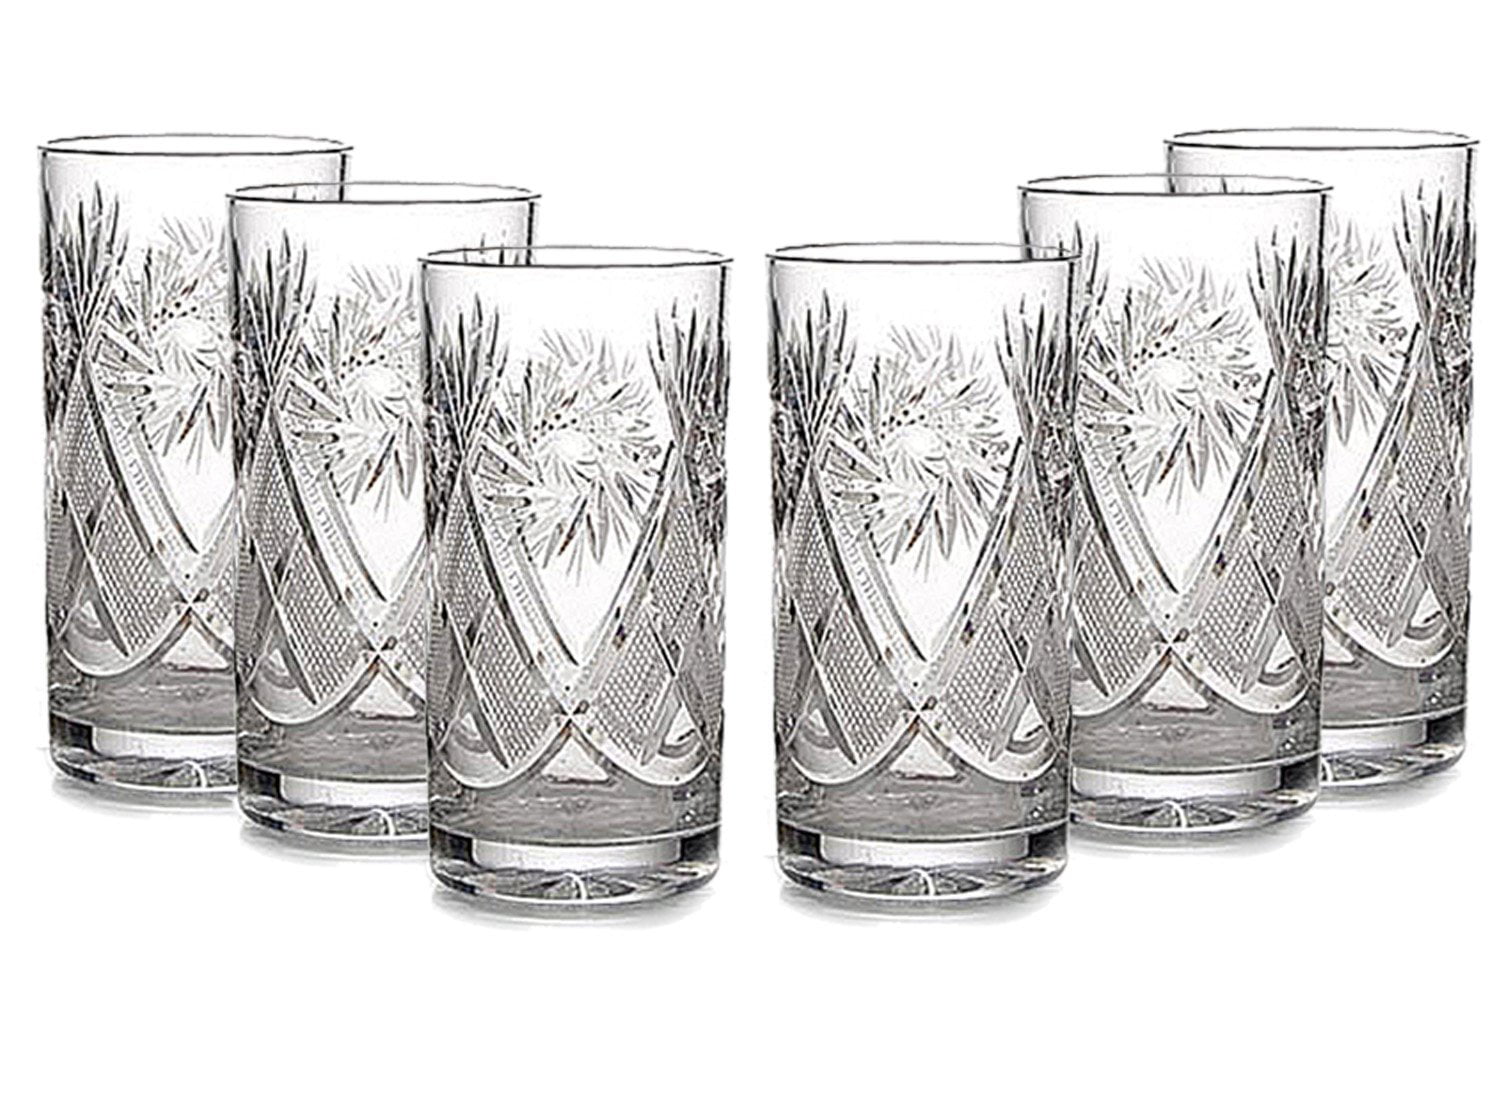 11 oz Russian Crystal Highball Glass for Hot/Cold Drinks for Podstakannik USSR 